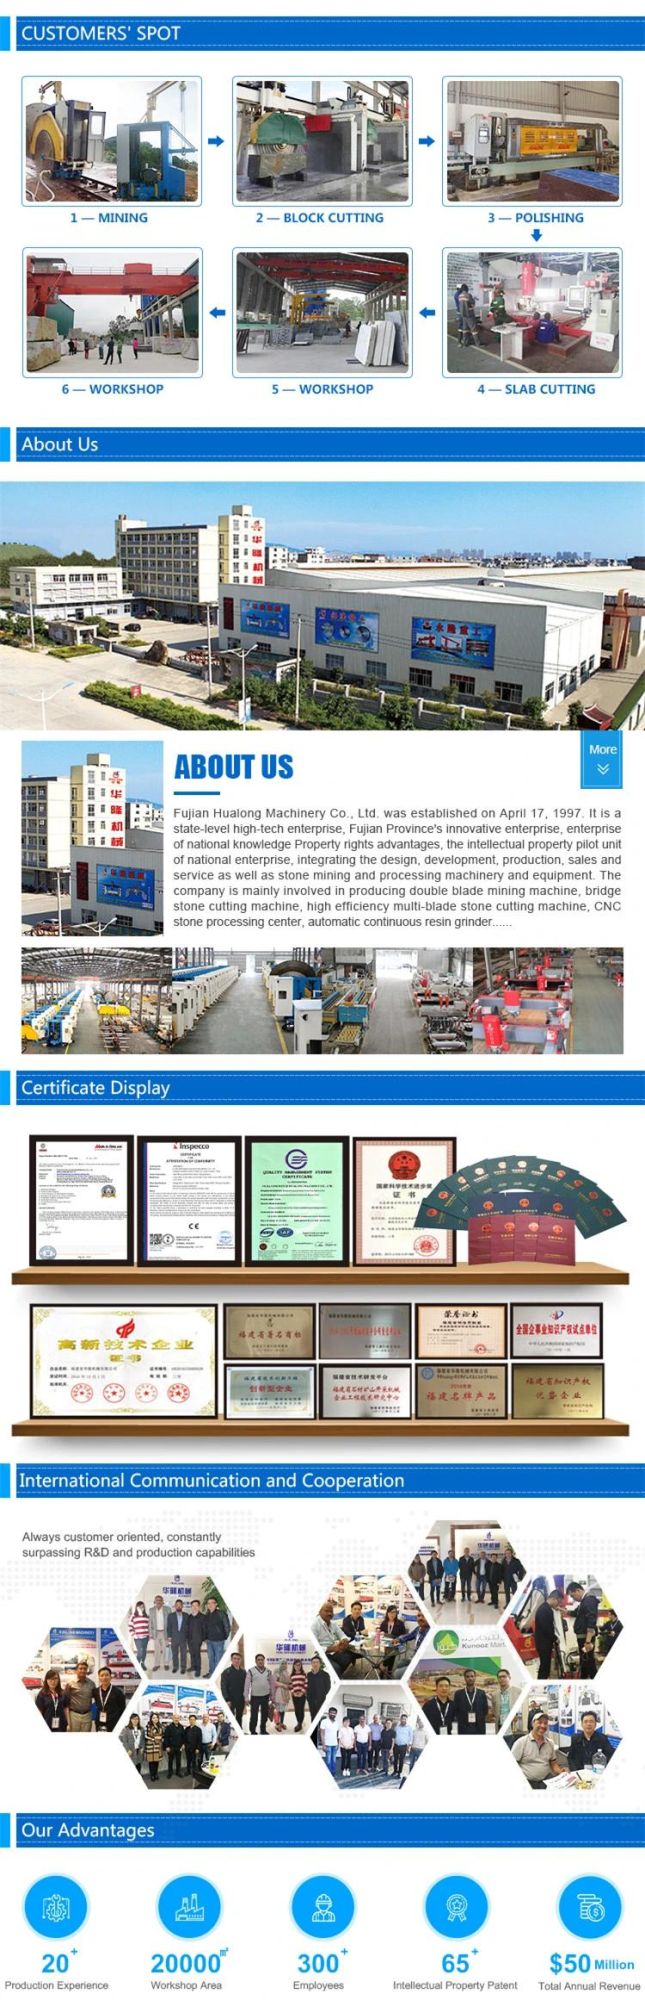 CE Certification Double Blade Stone Cutting Machine Quarry Rock Stone Cutter Double Saw Mining Machinery for Marble Granite Stone Sawing Machine